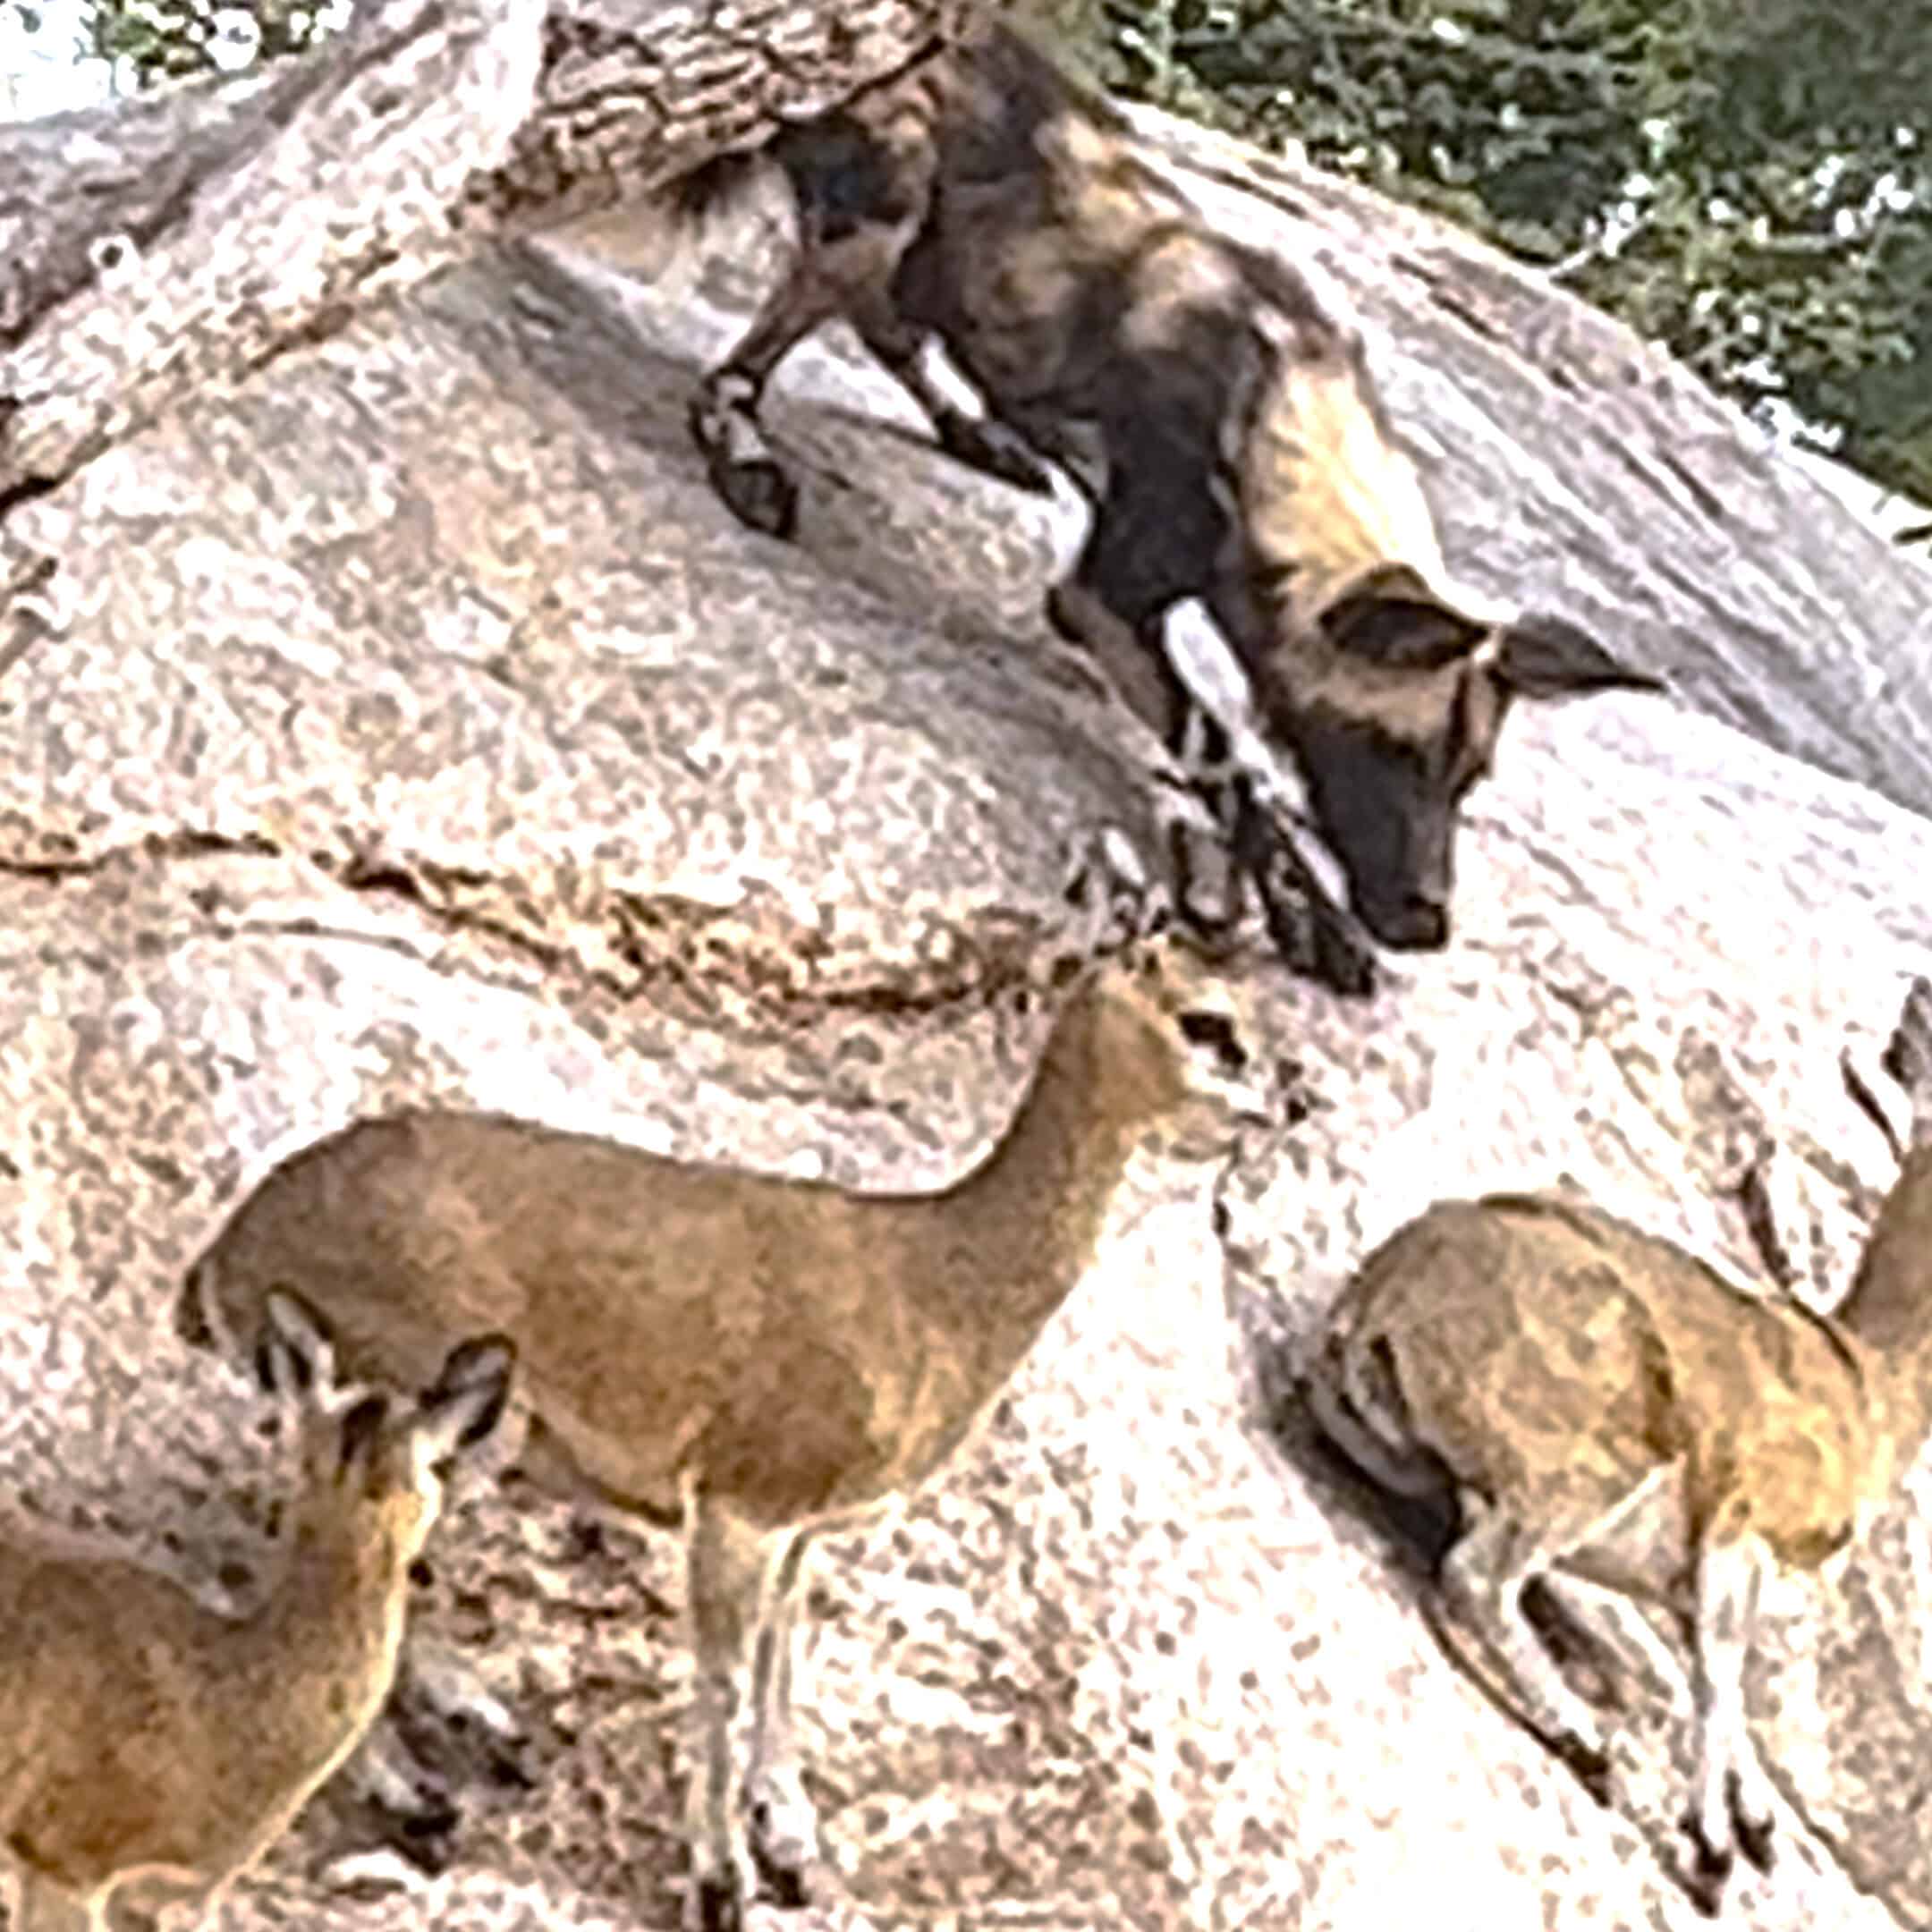 Wild dog tries to hunt antelope that are stuck at the edge of the cliff. So close yet so far